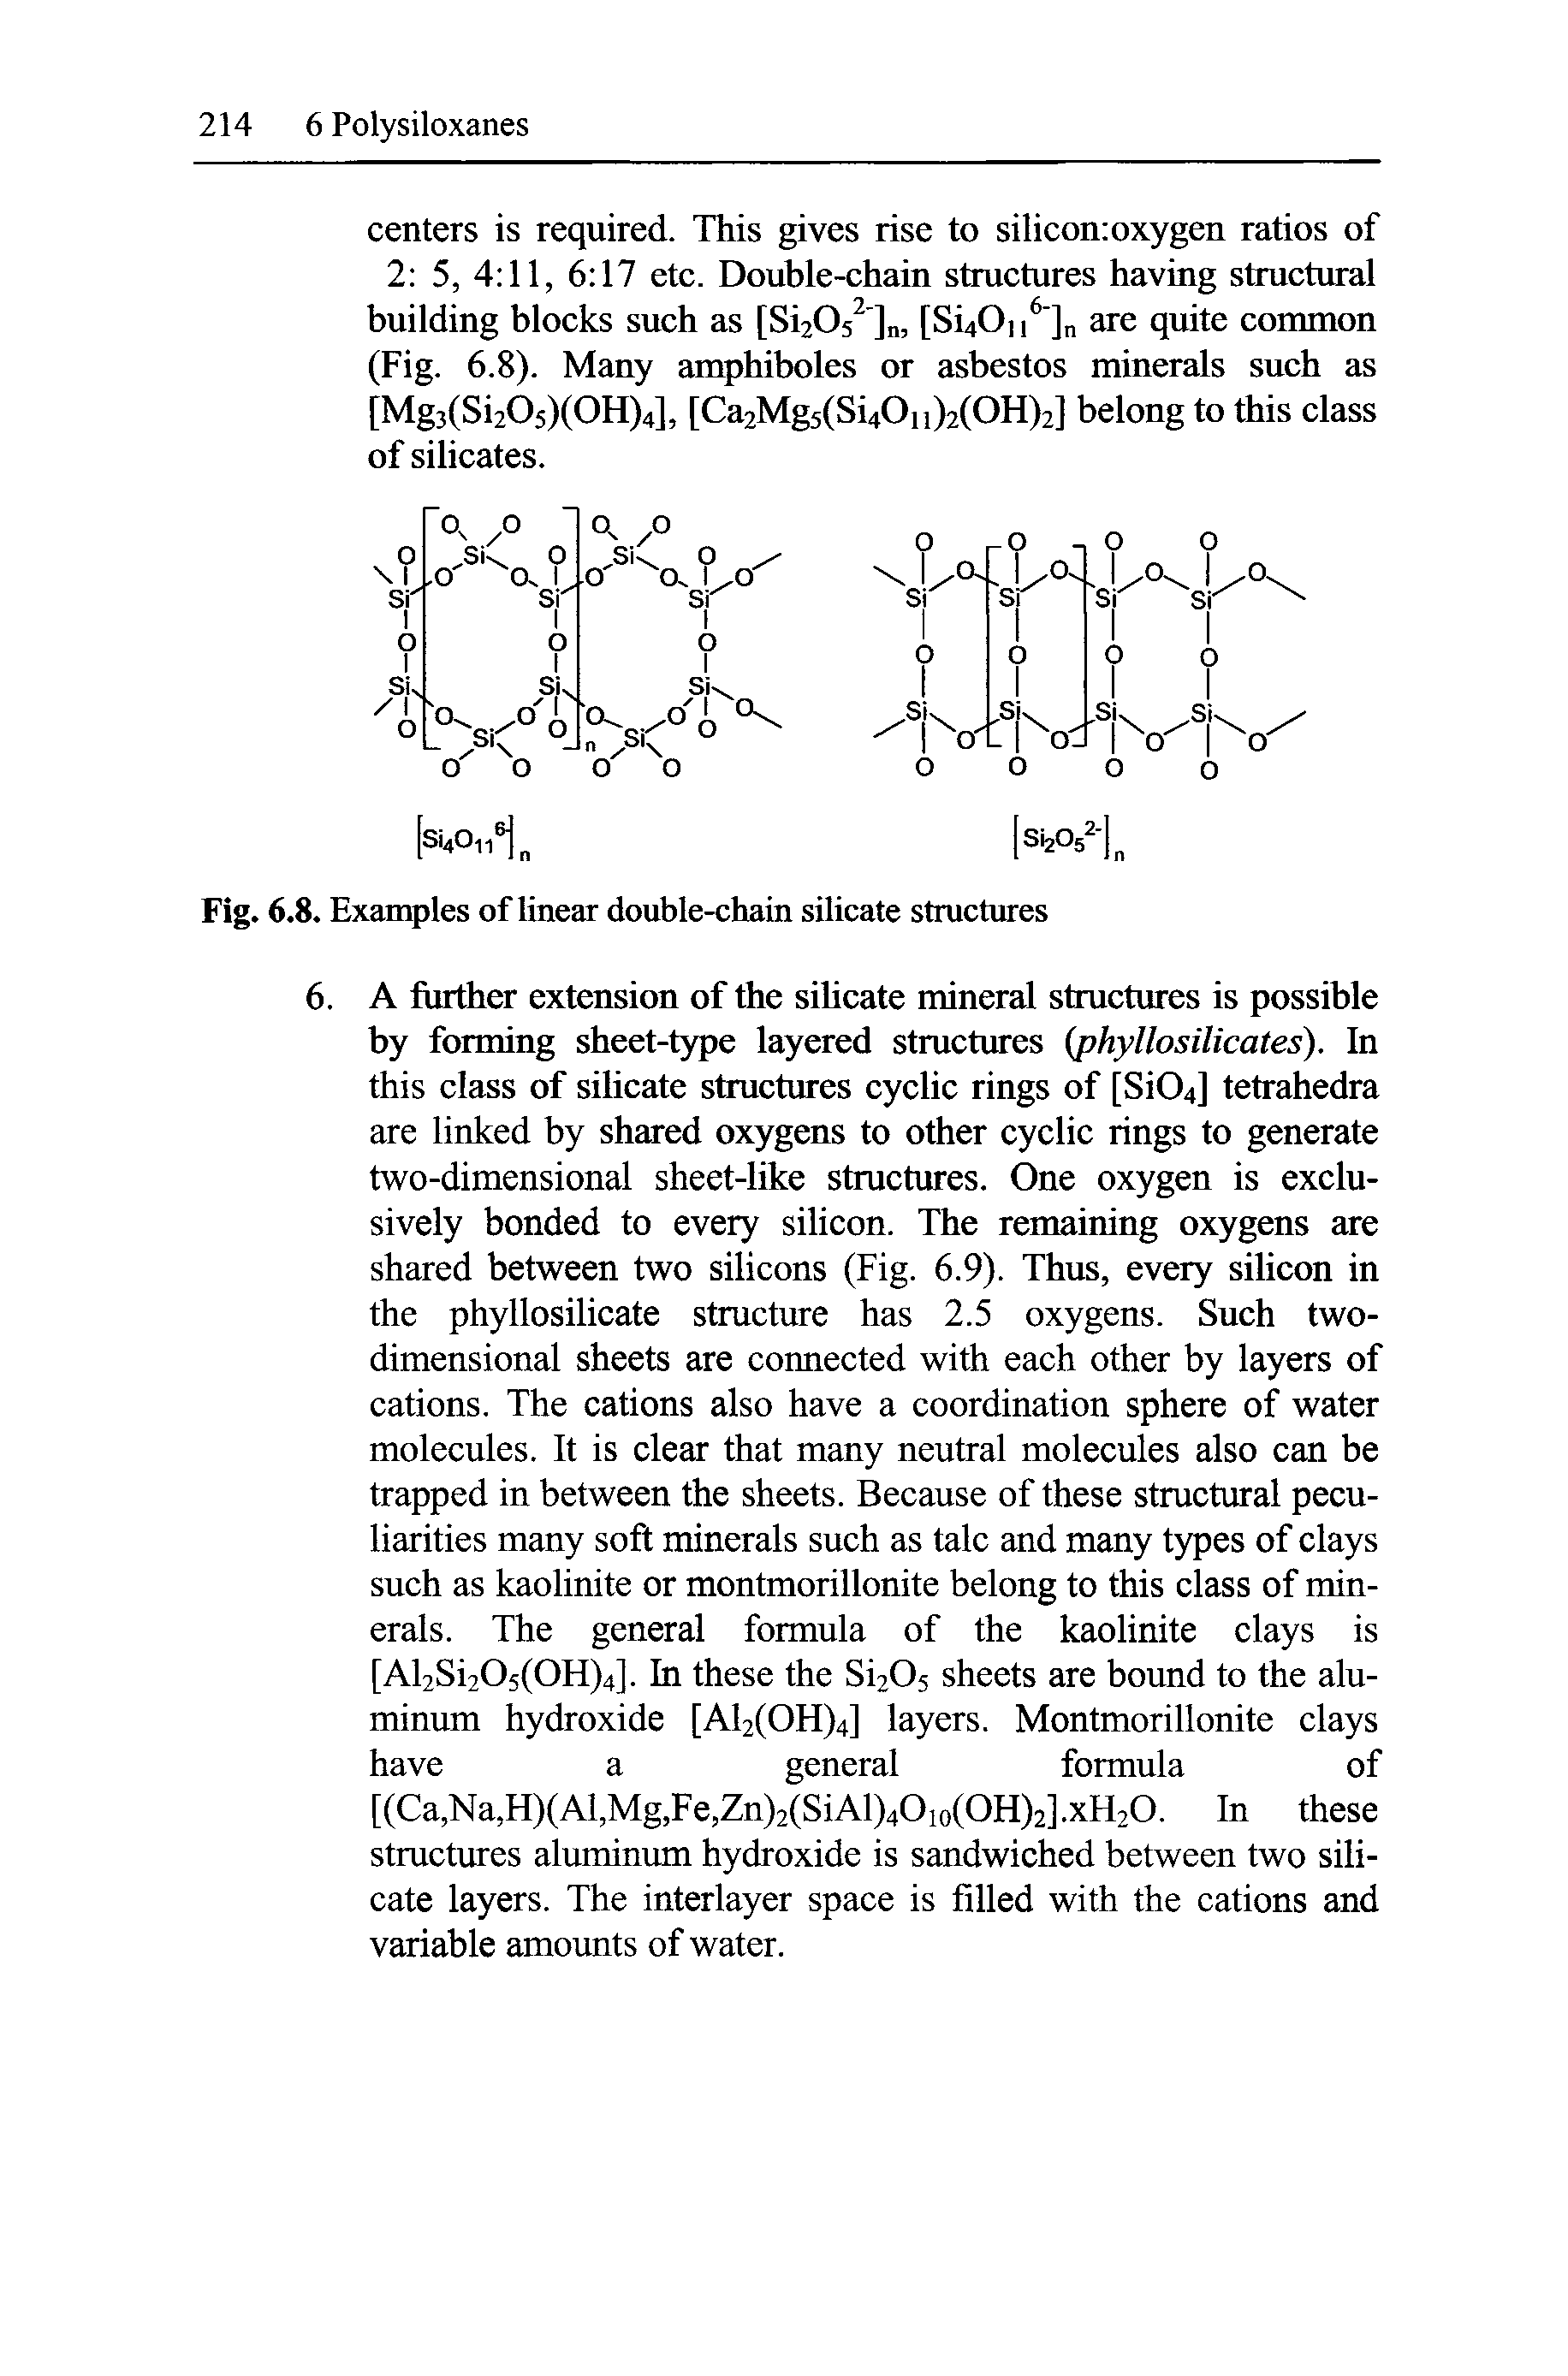 Fig. 6.8. Examples of linear double-chain silicate stmctures...